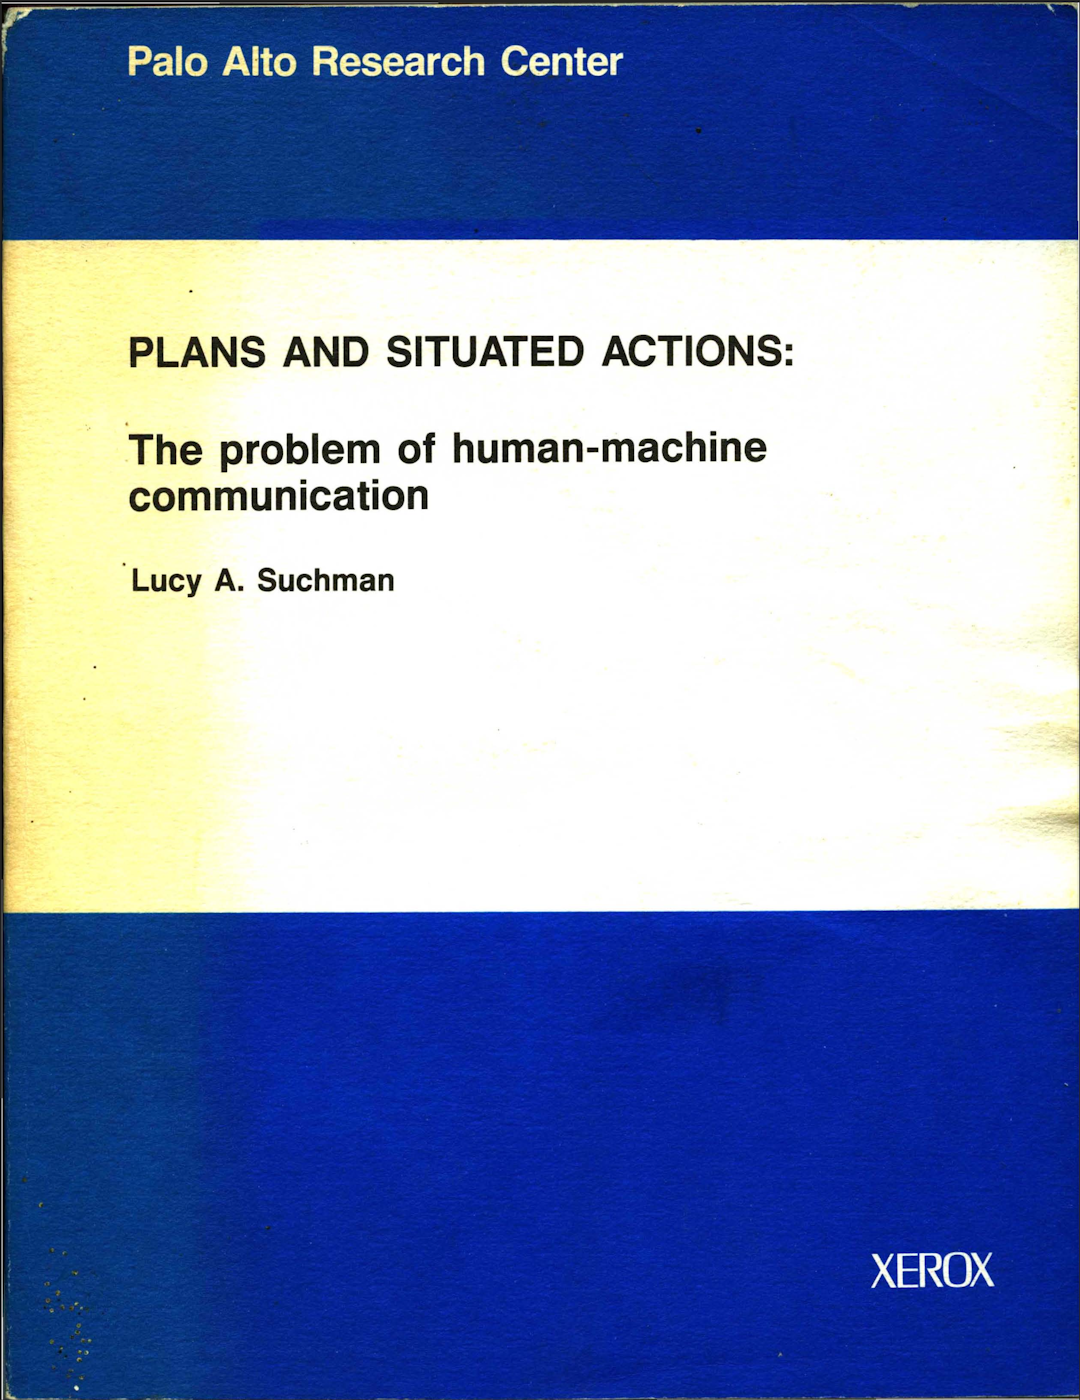 Plans and Situated Actions: The Problem of Human-Machine Communication